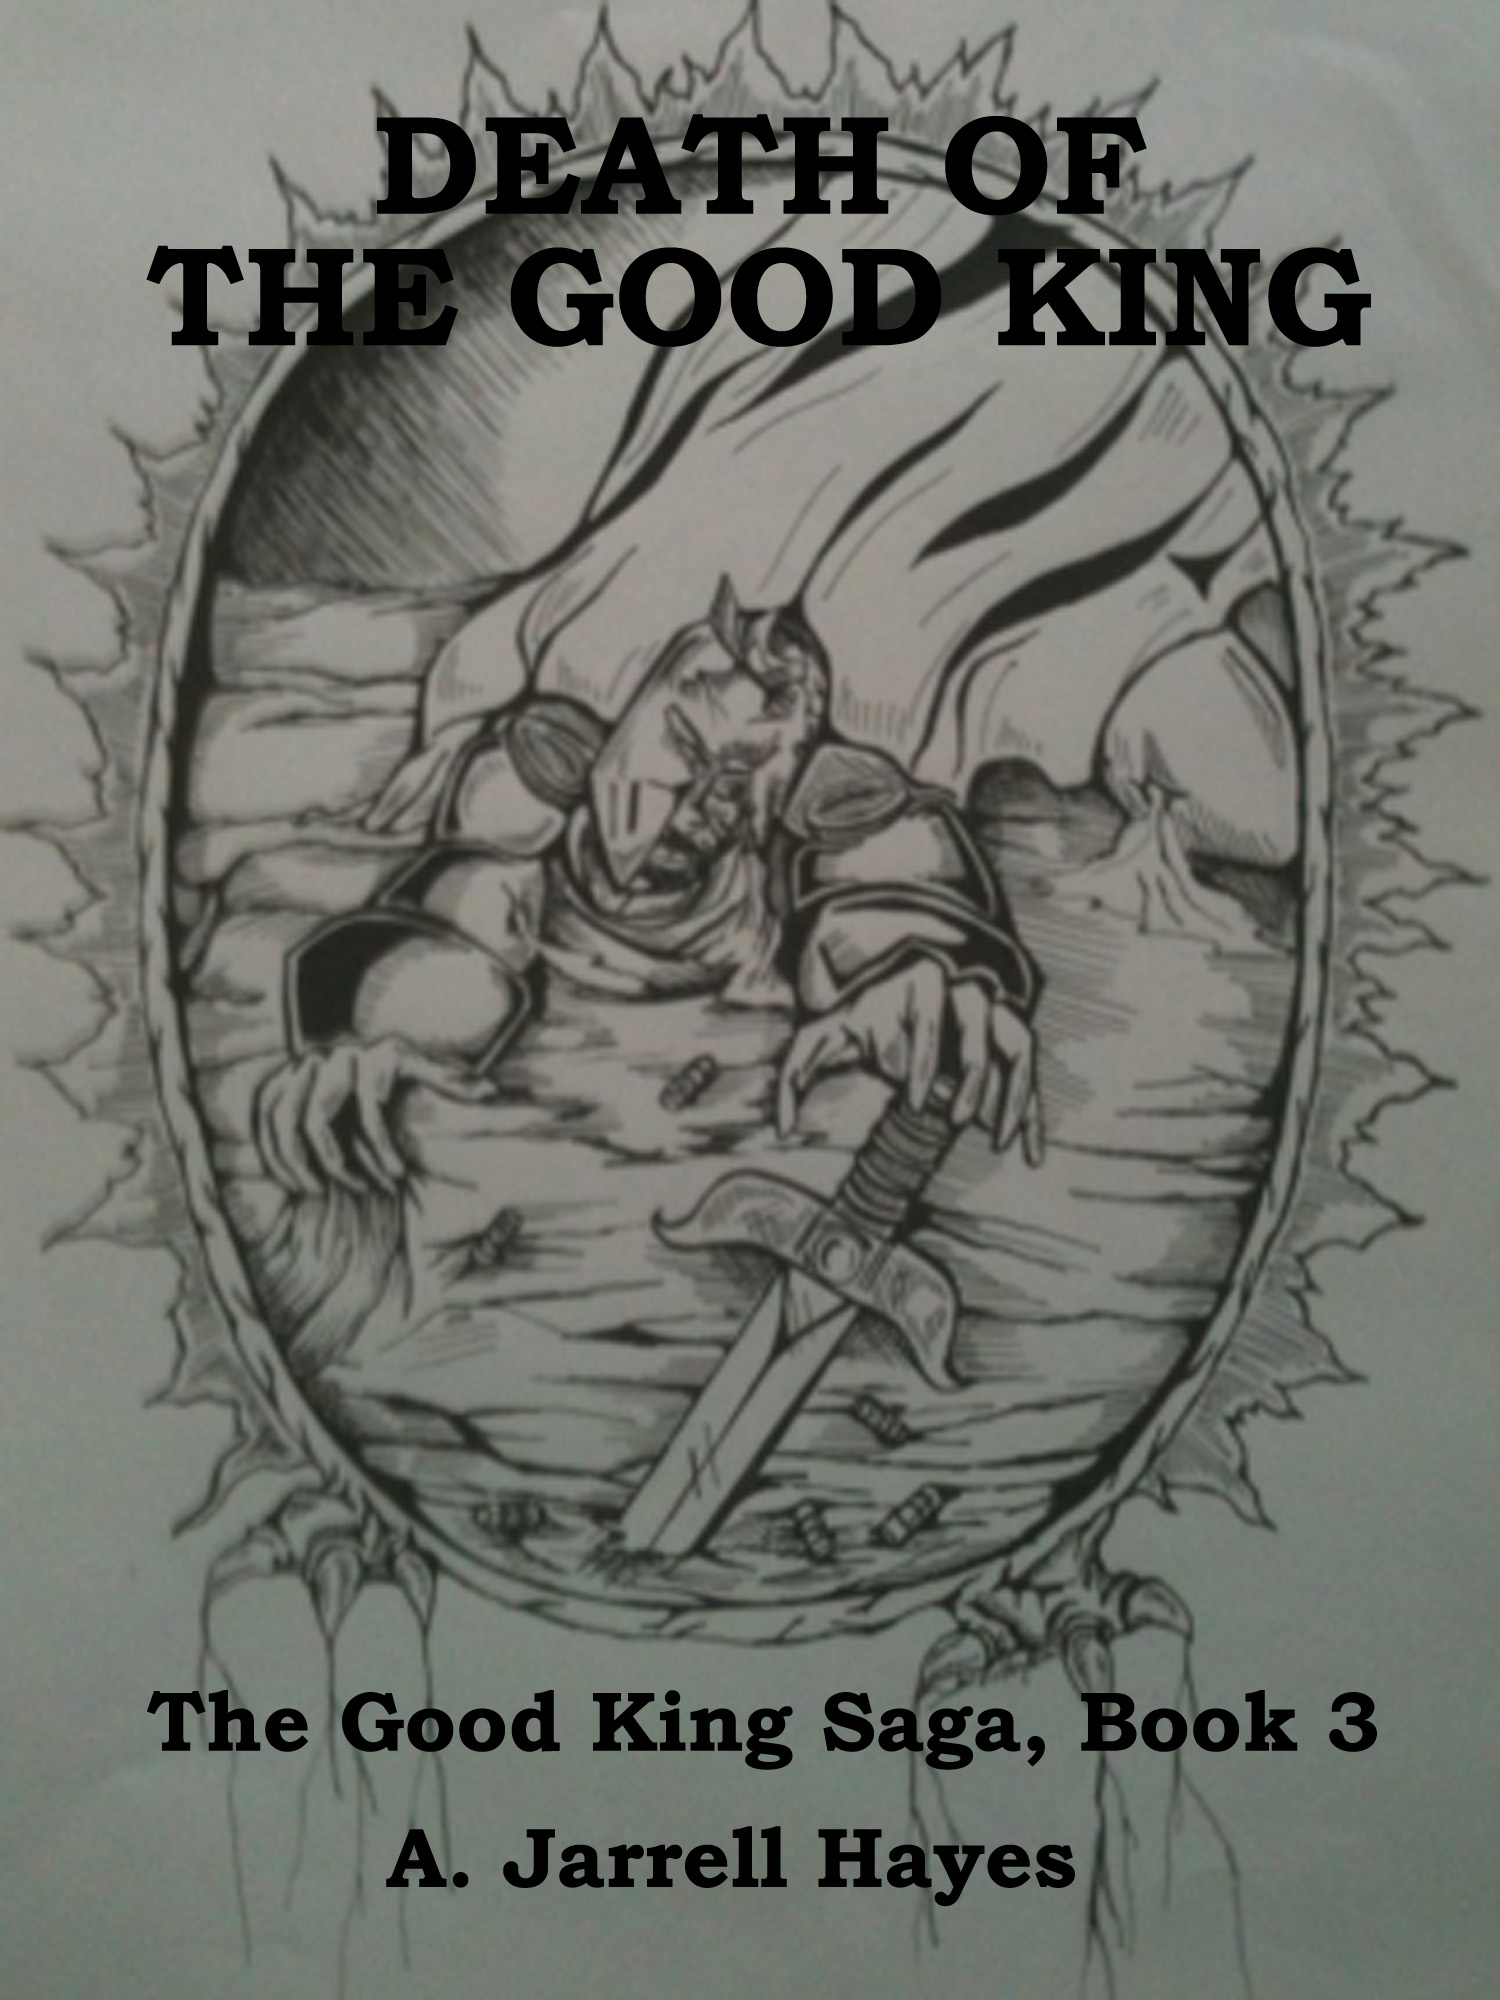 Death of the Good King by A. Jarrell Hayes